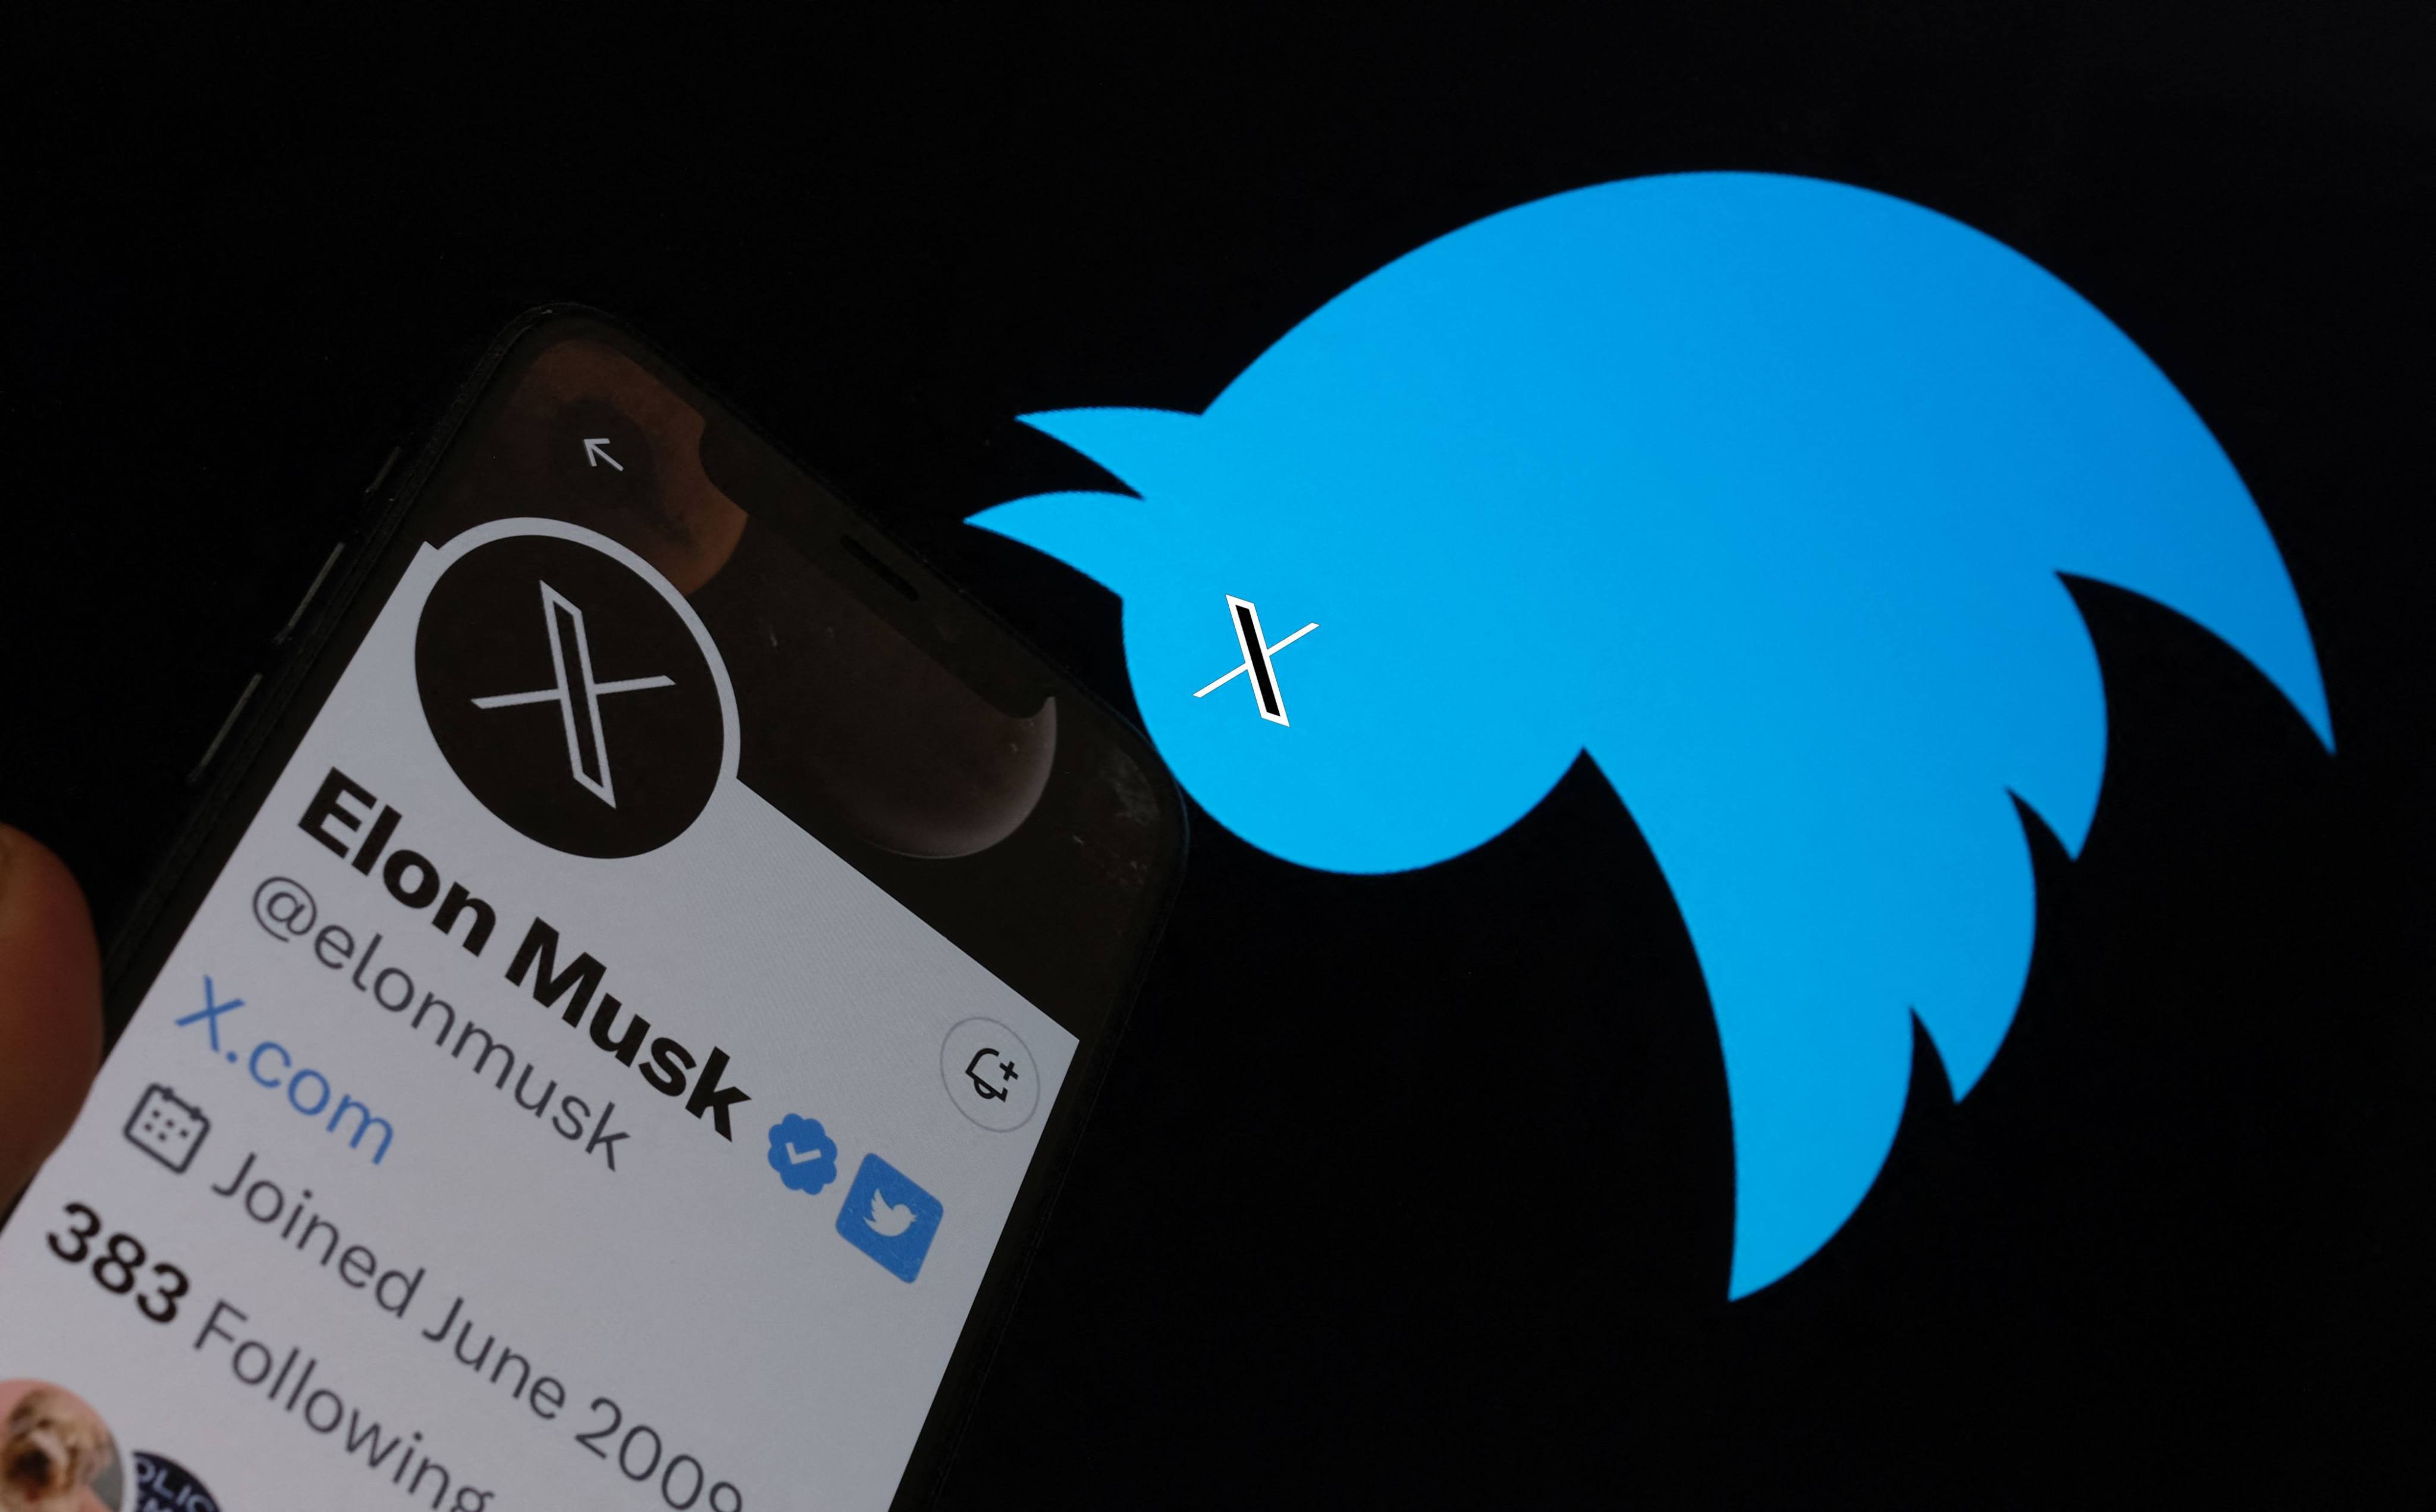 Elon Musk killed off the Twitter logo replacing the world-recognized blue bird with a white X as the tycoon accelerates his efforts to transform the floundering social media giant. Photo: AFP